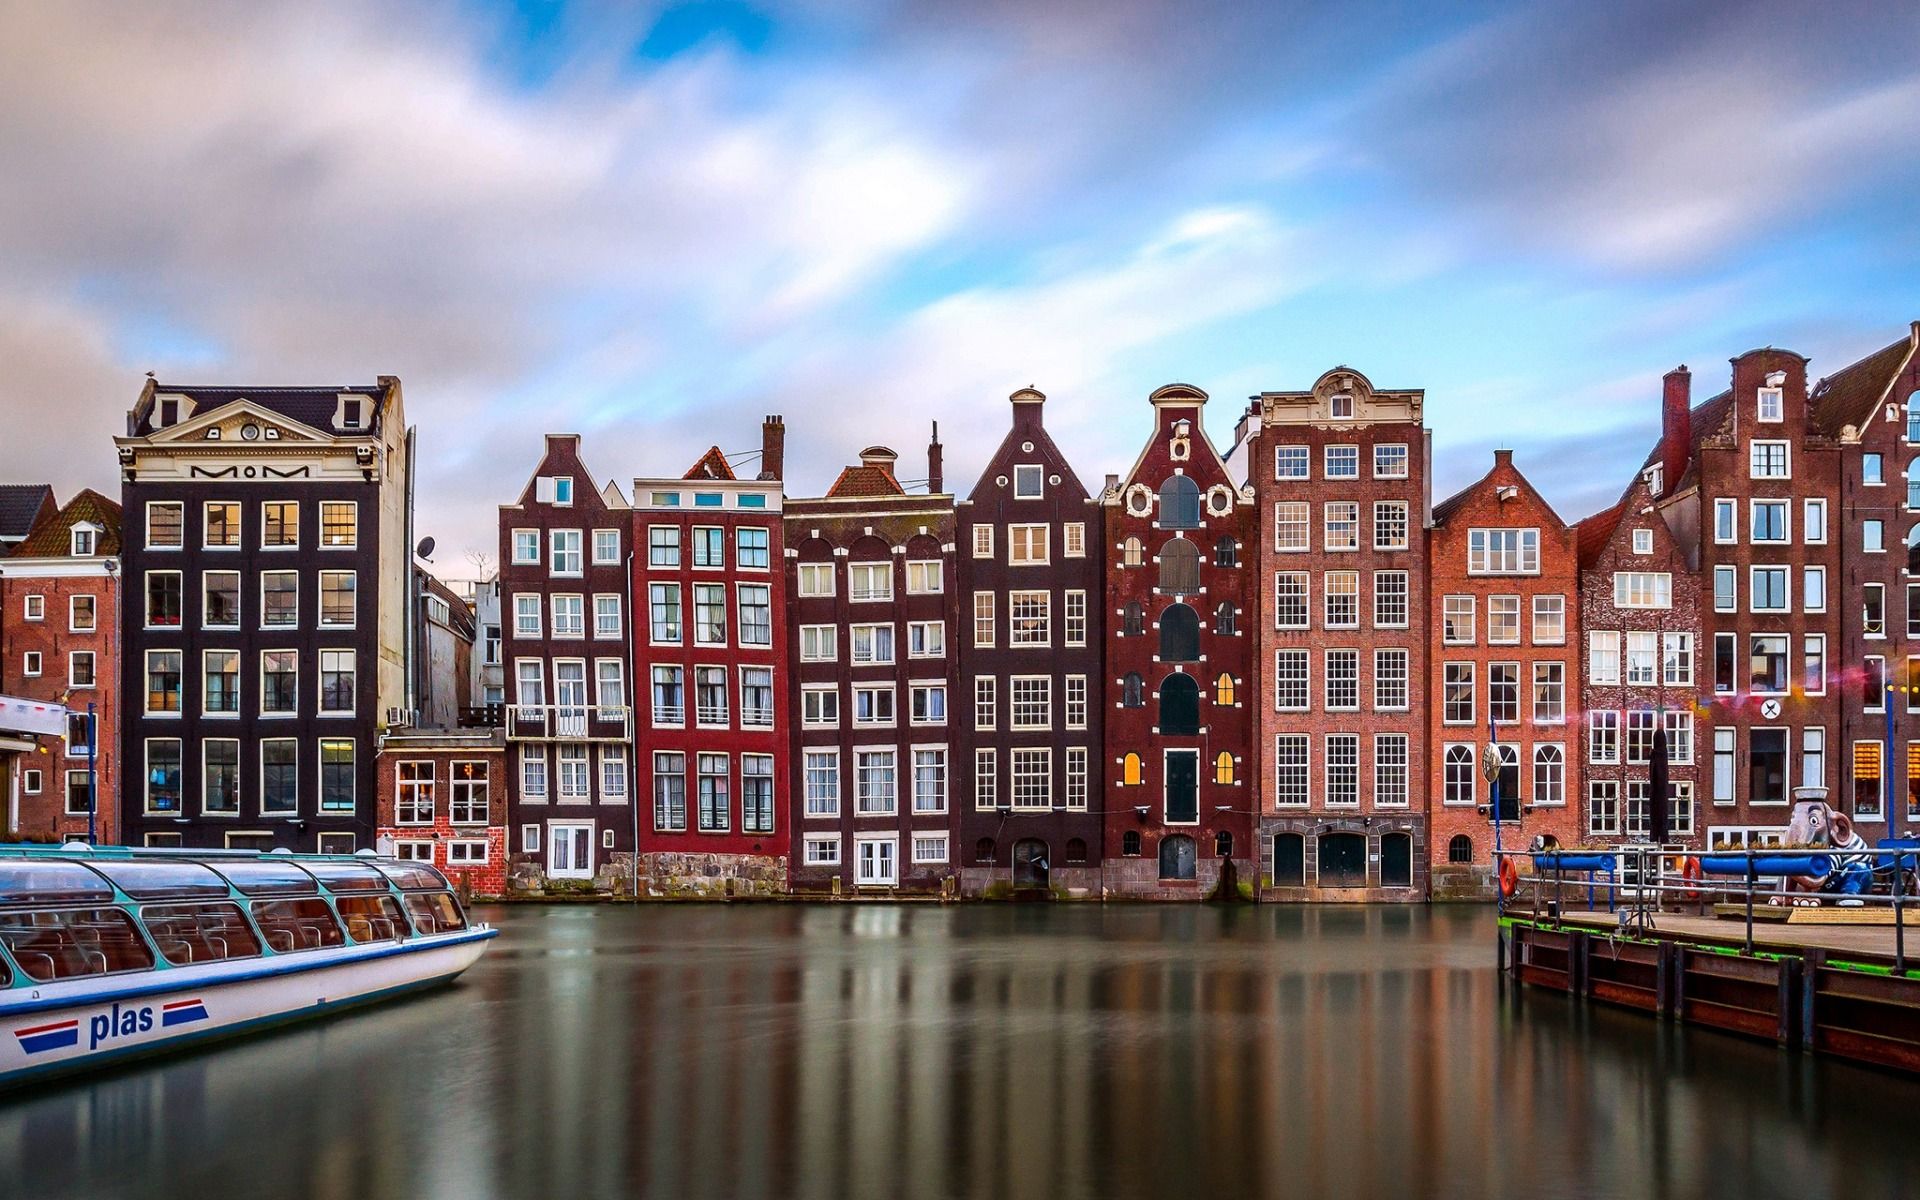 Download wallpaper Amsterdam, houses, spring, canals, motor ships, Netherlands, Holland for desktop with resolution 1920x1200. High Quality HD picture wallpaper